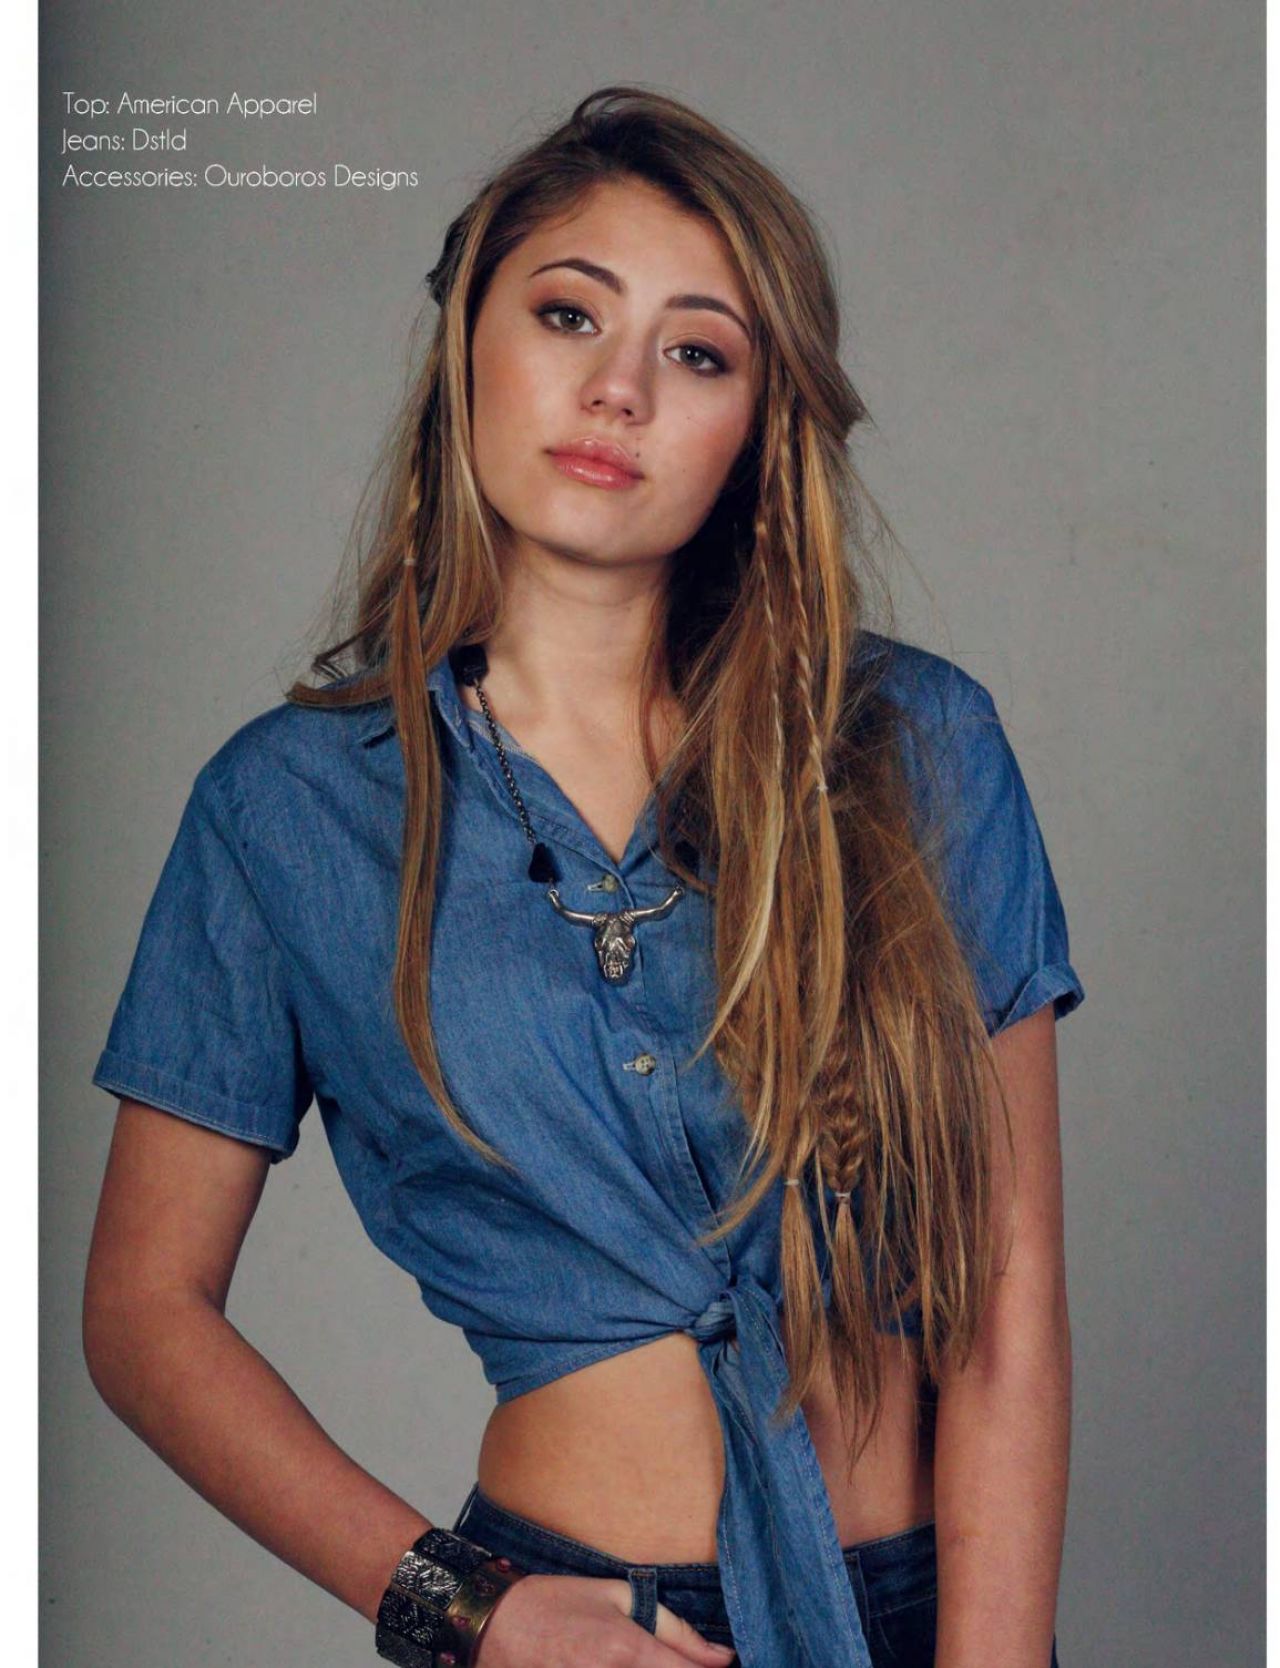 Lia Marie Johnson High Quality Background on Wallpapers Vista